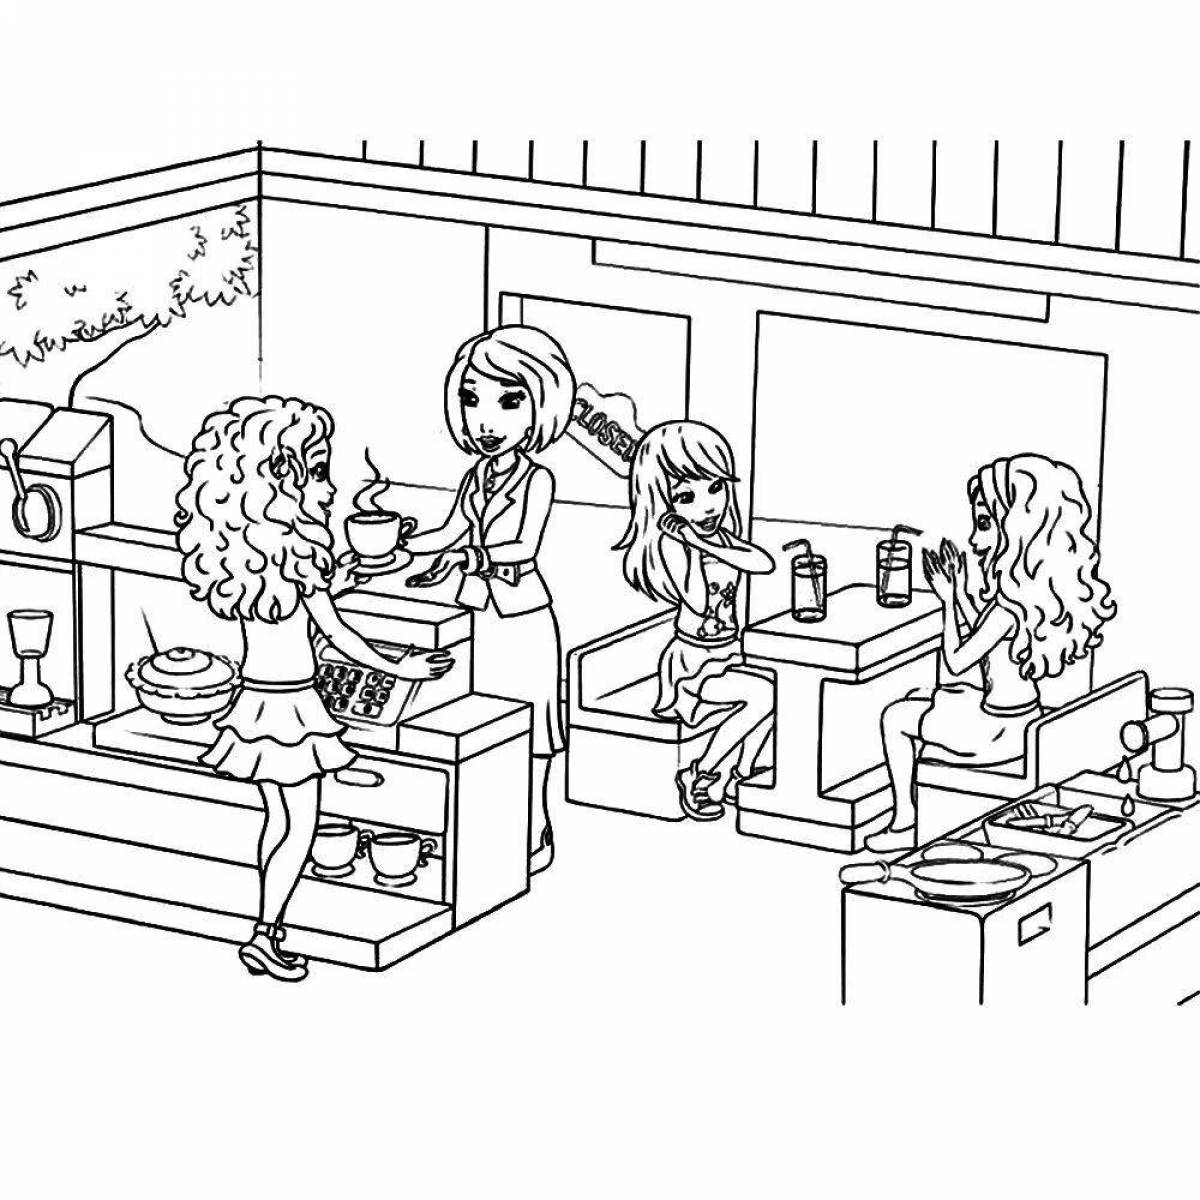 Playful lego friends coloring page